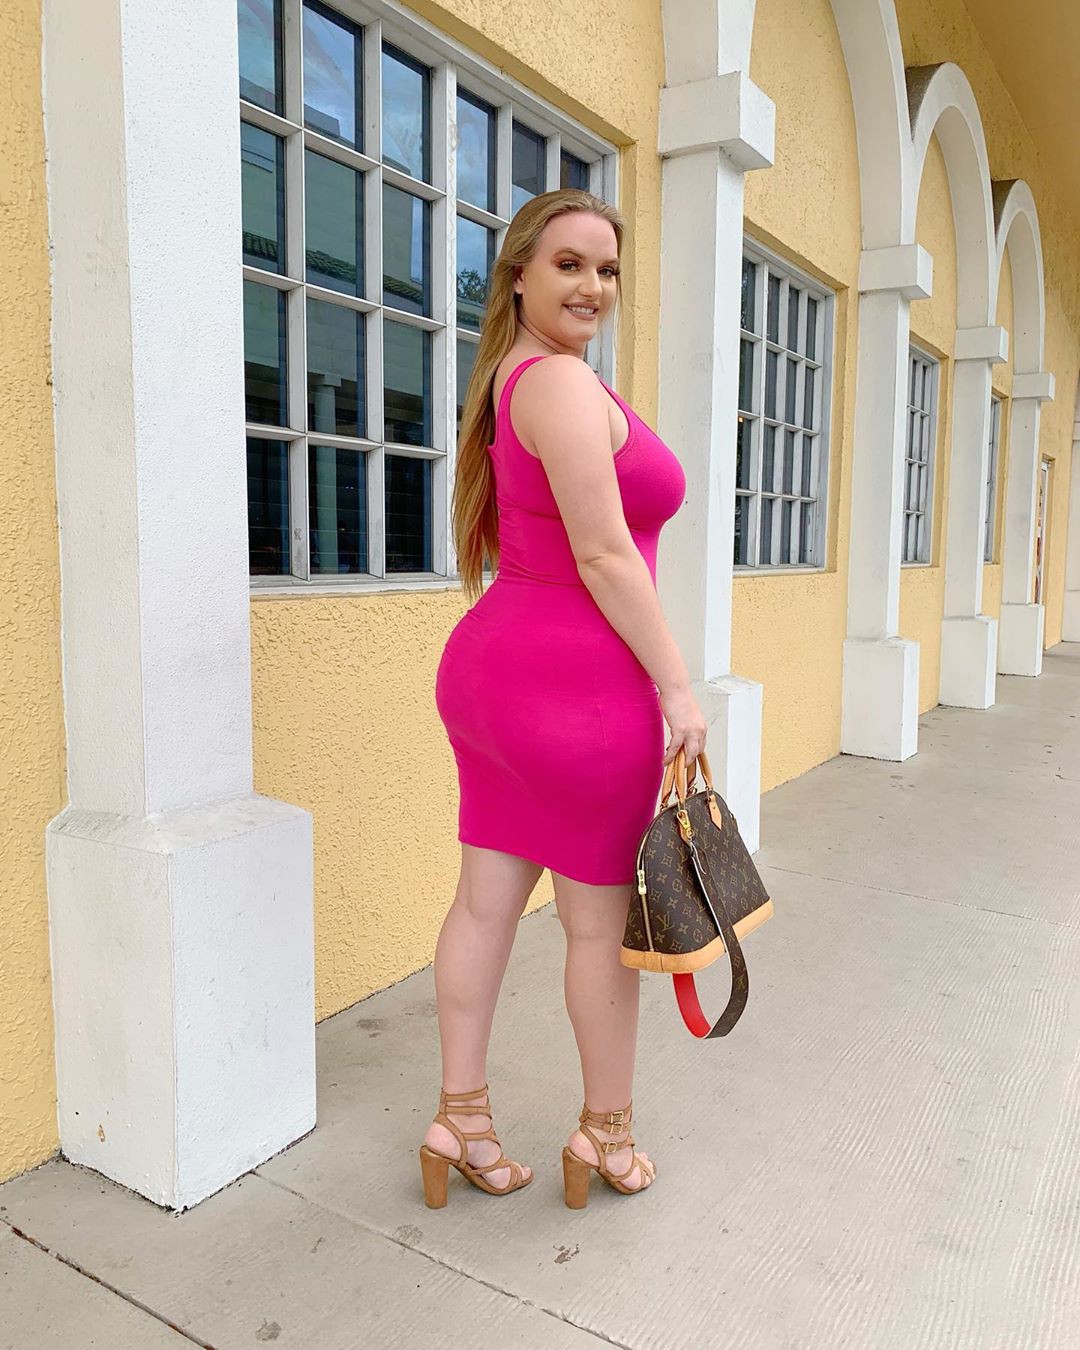 Yellow and pink cocktail dress, beautiful blond hairs: Cocktail Dresses,  Yellow And Pink Outfit  